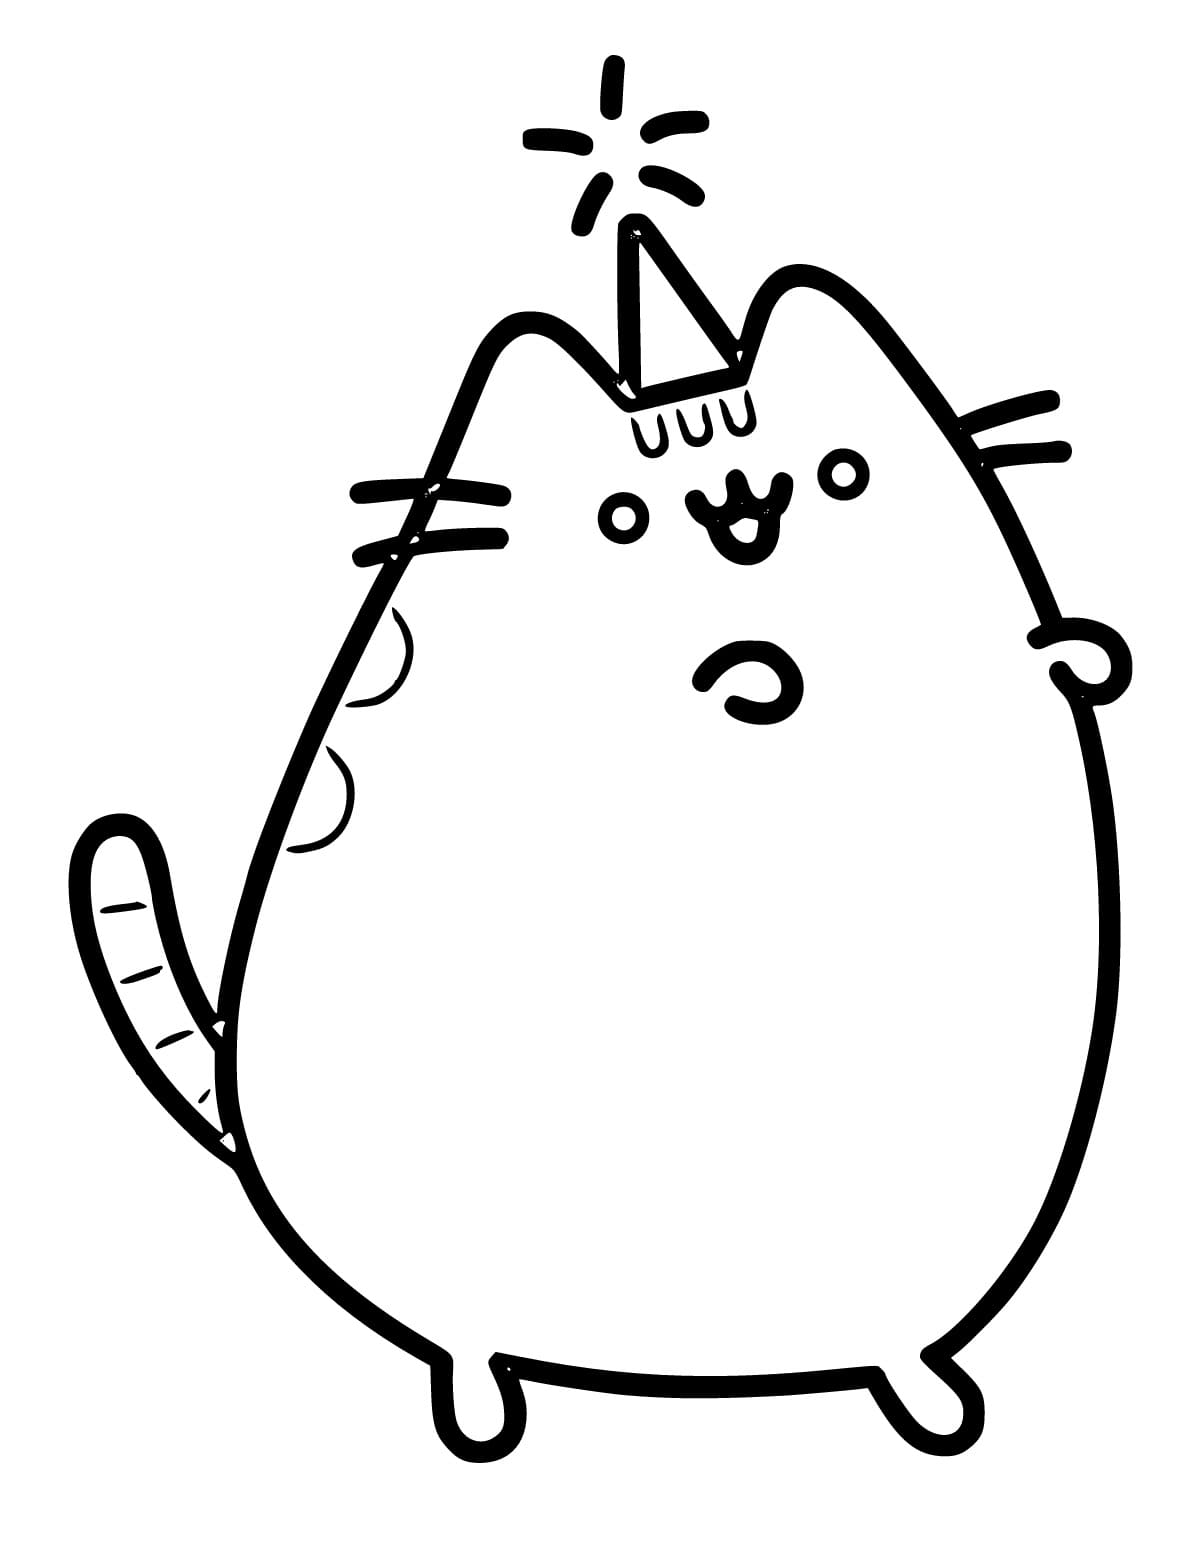 Pusheen and Party Hat coloring page - Download, Print or Color Online ...